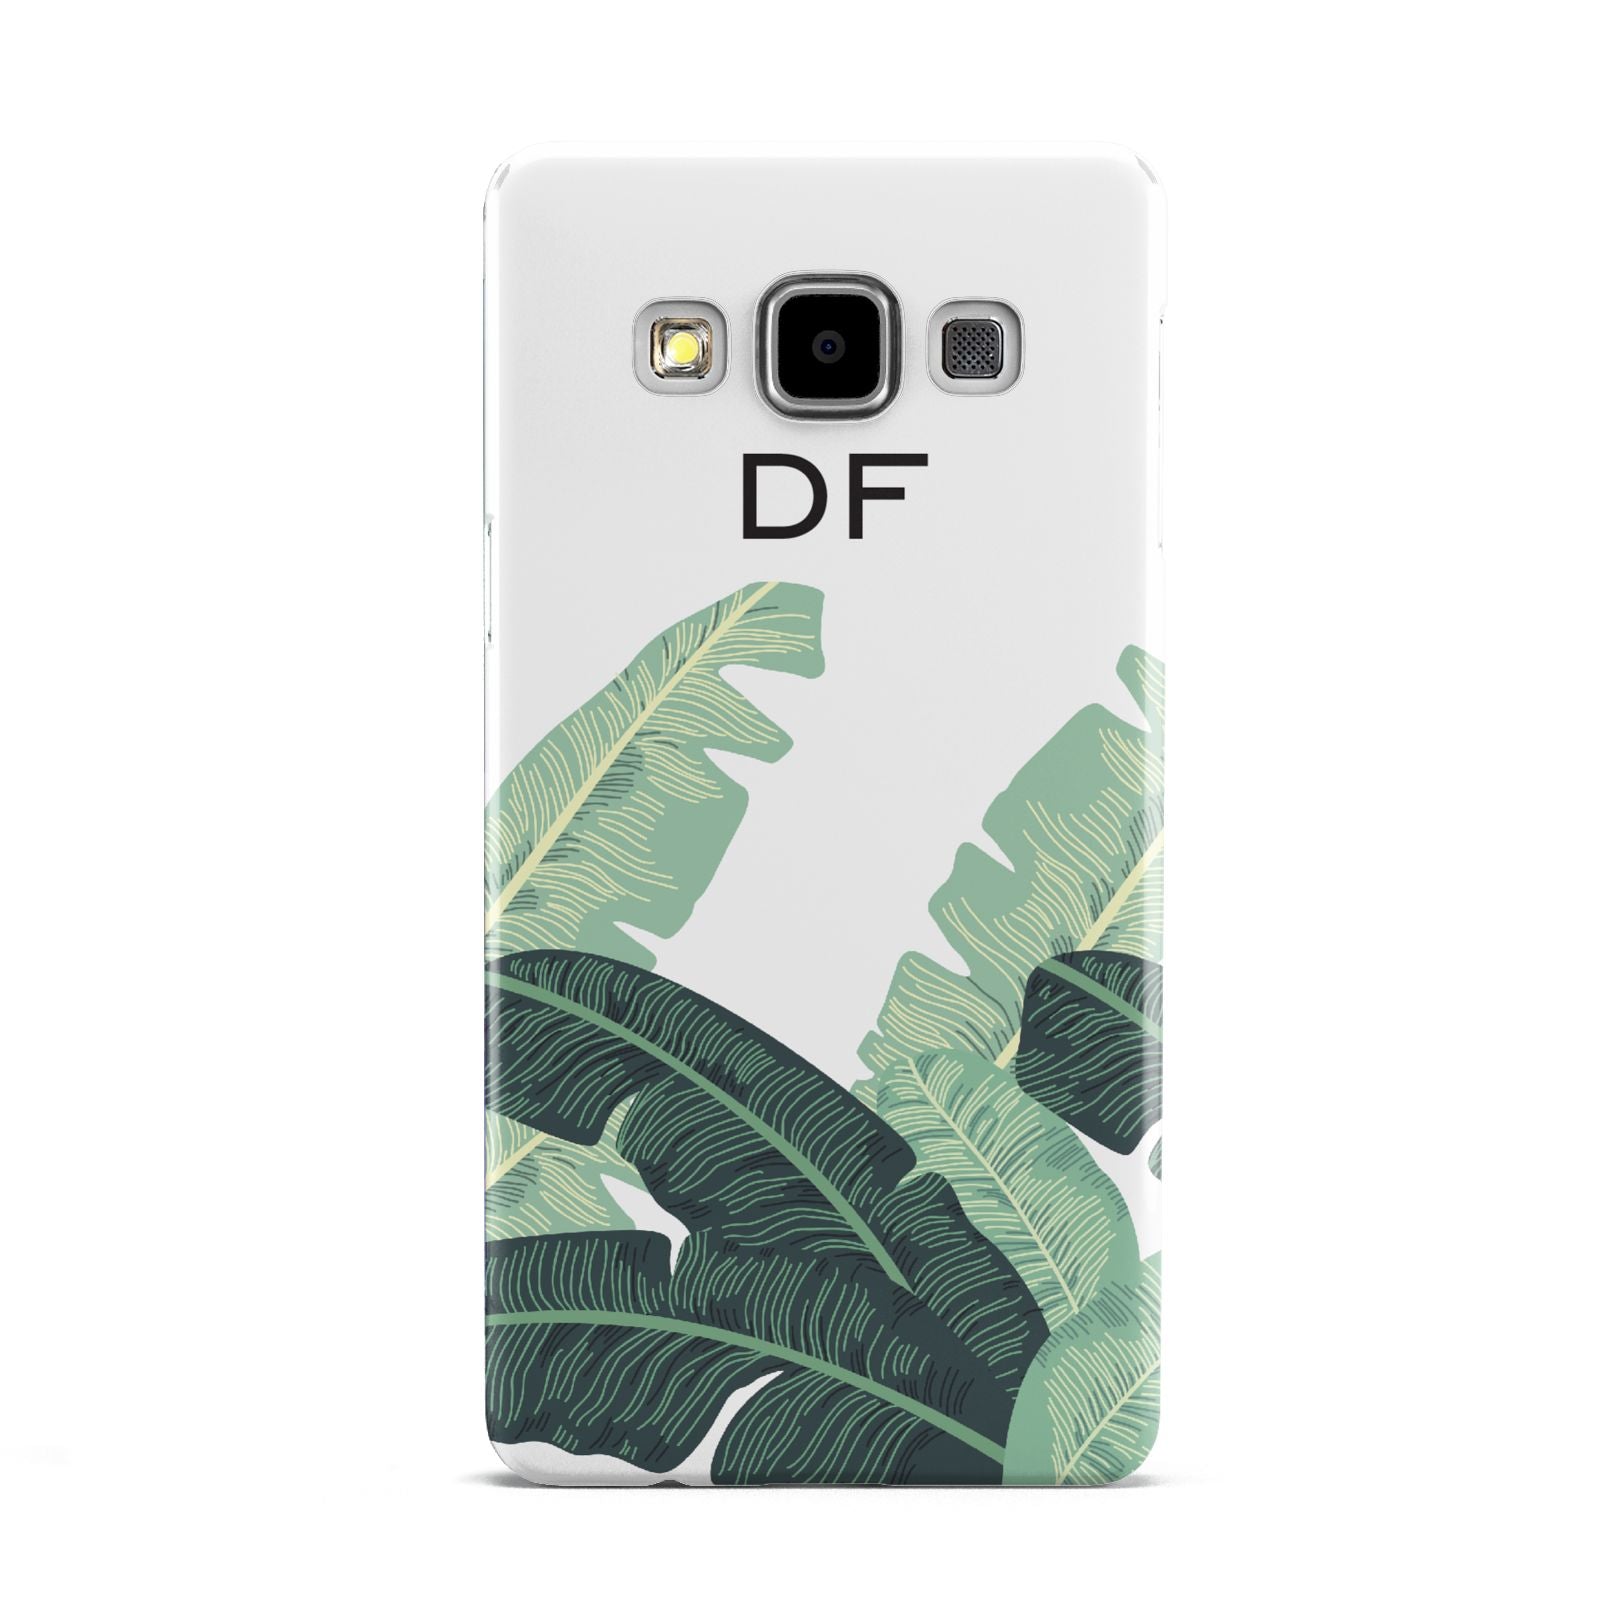 Personalised White Banana Leaf Samsung Galaxy A5 Case